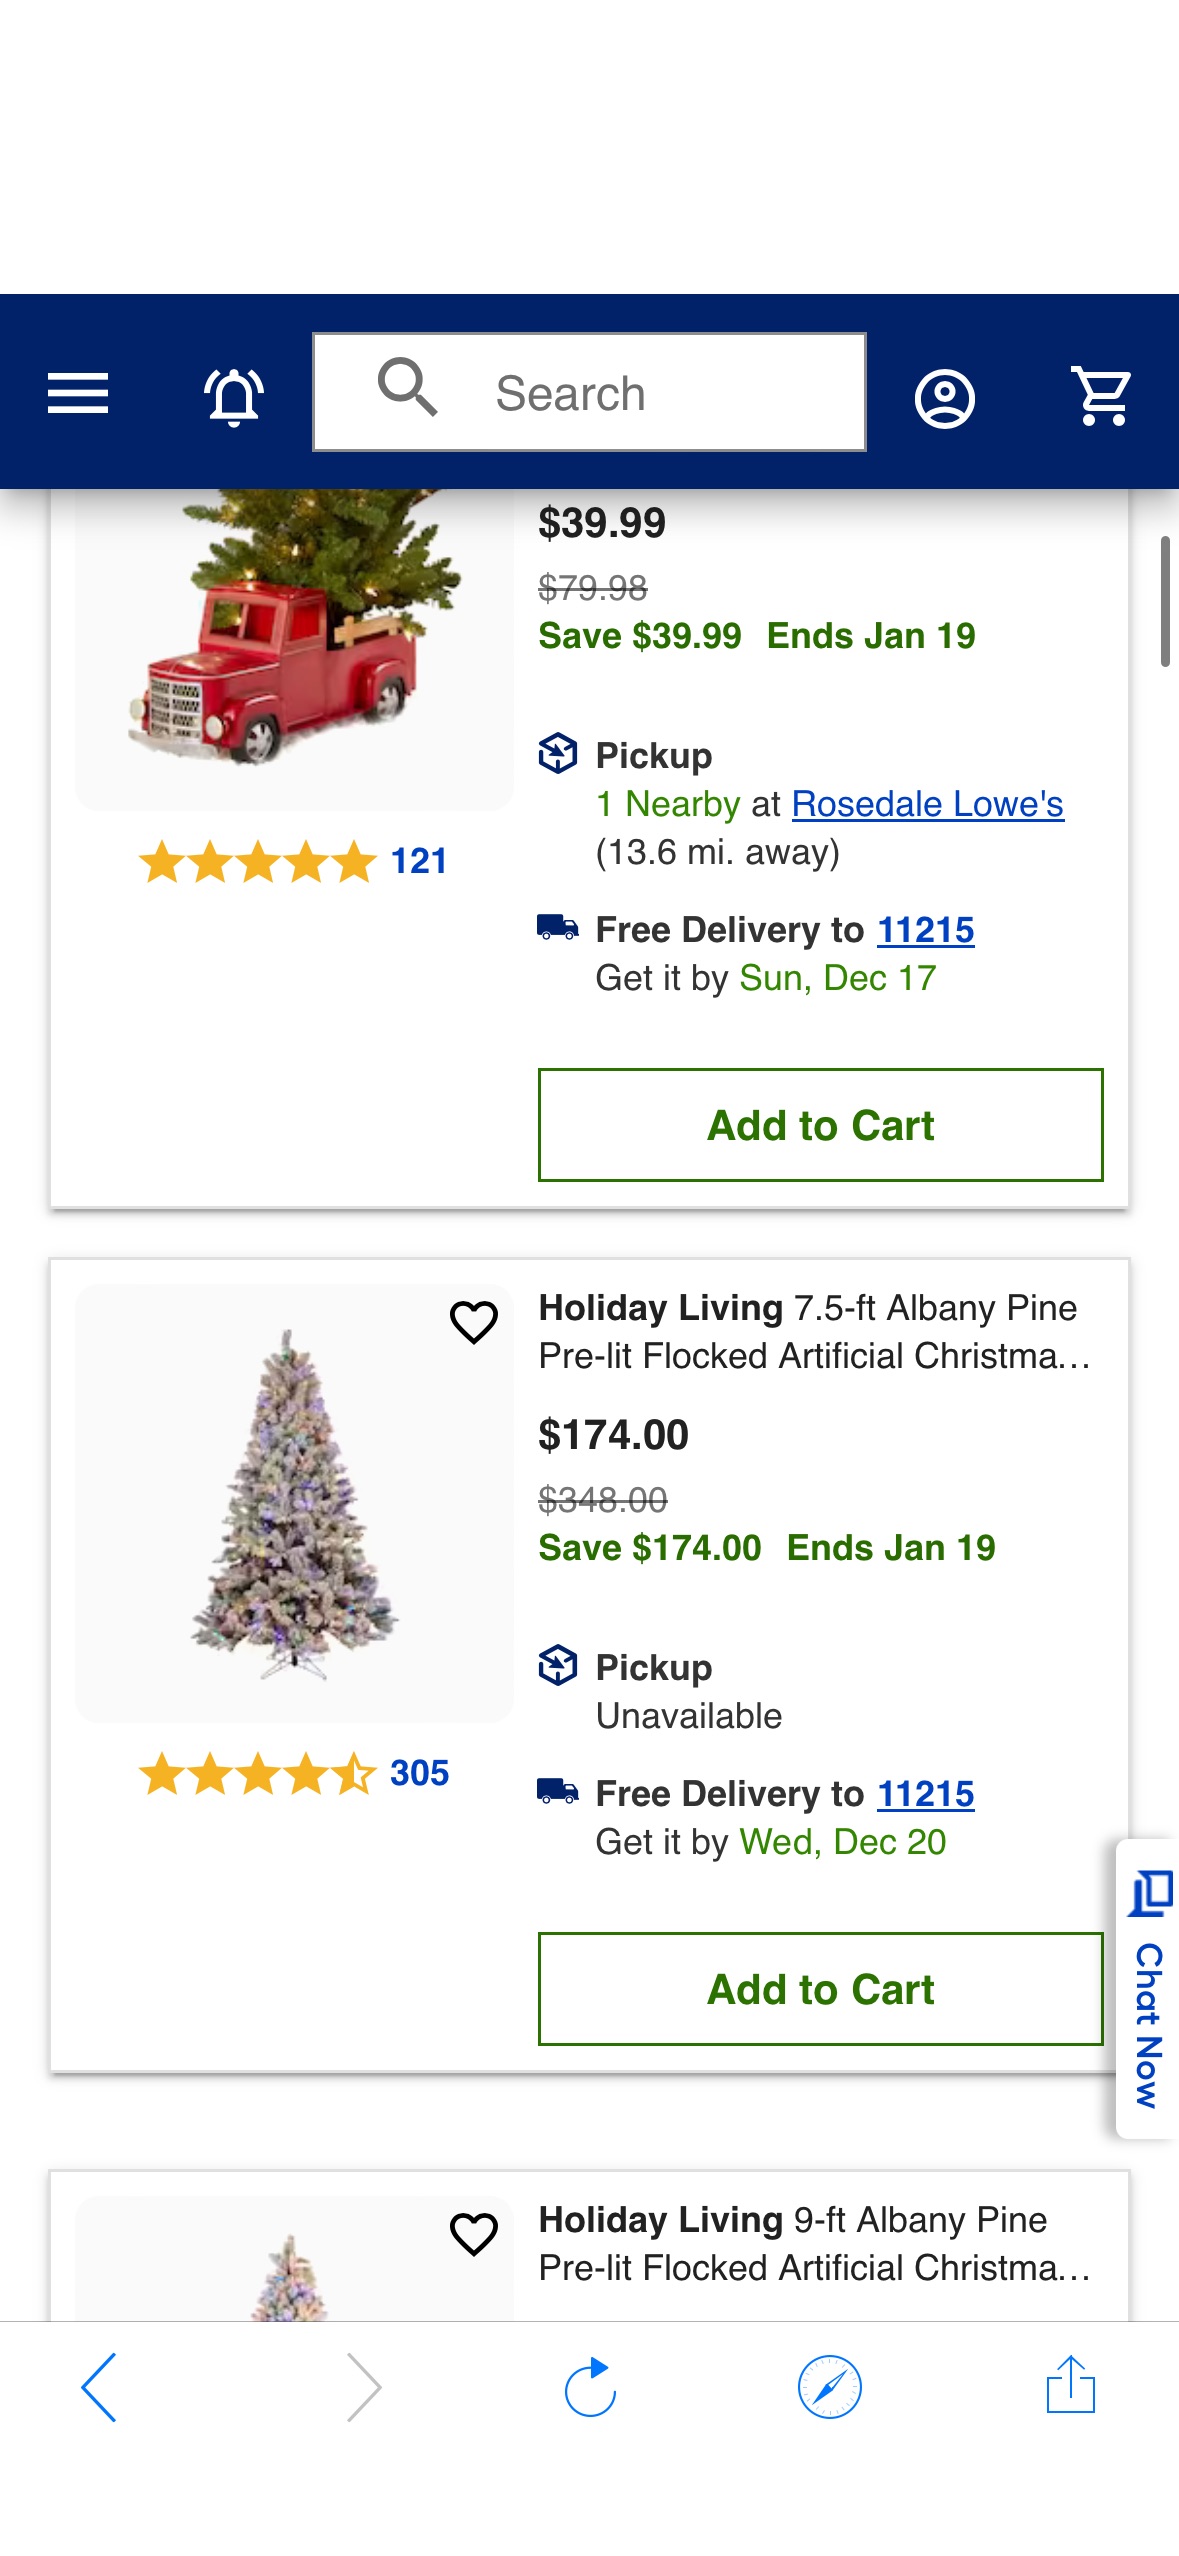 Christmas Decorations at Lowes.com